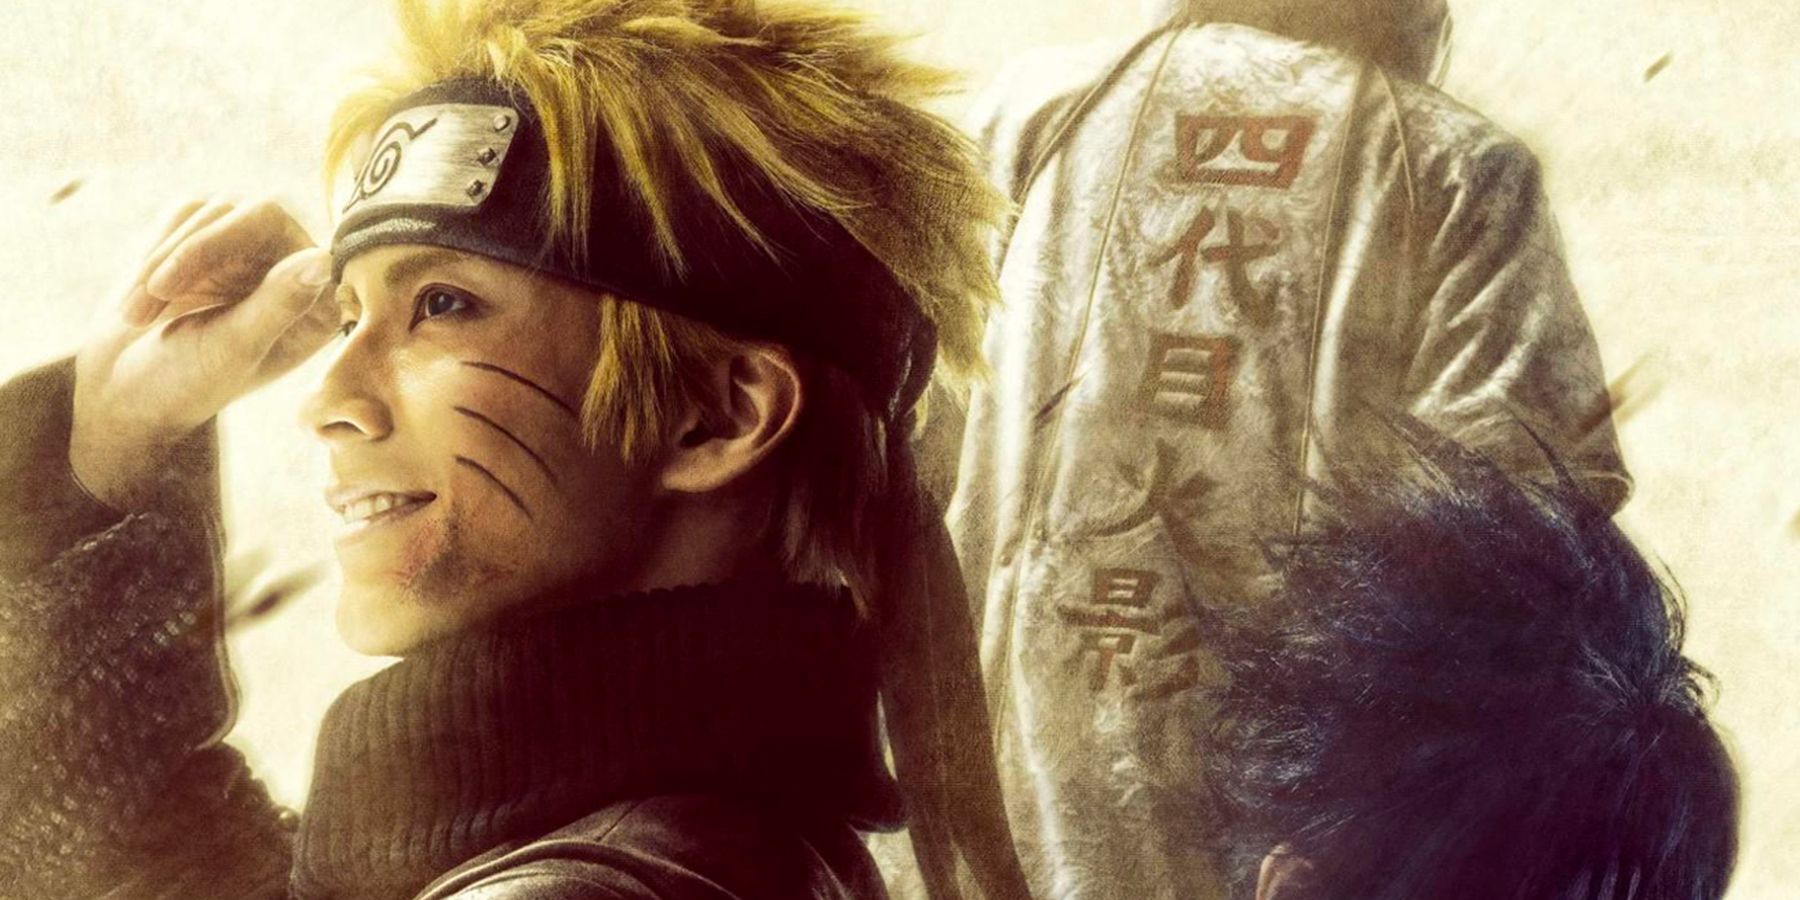 Naruto Debuts Stunning New Poster For Upcoming Live-Action Spectacle